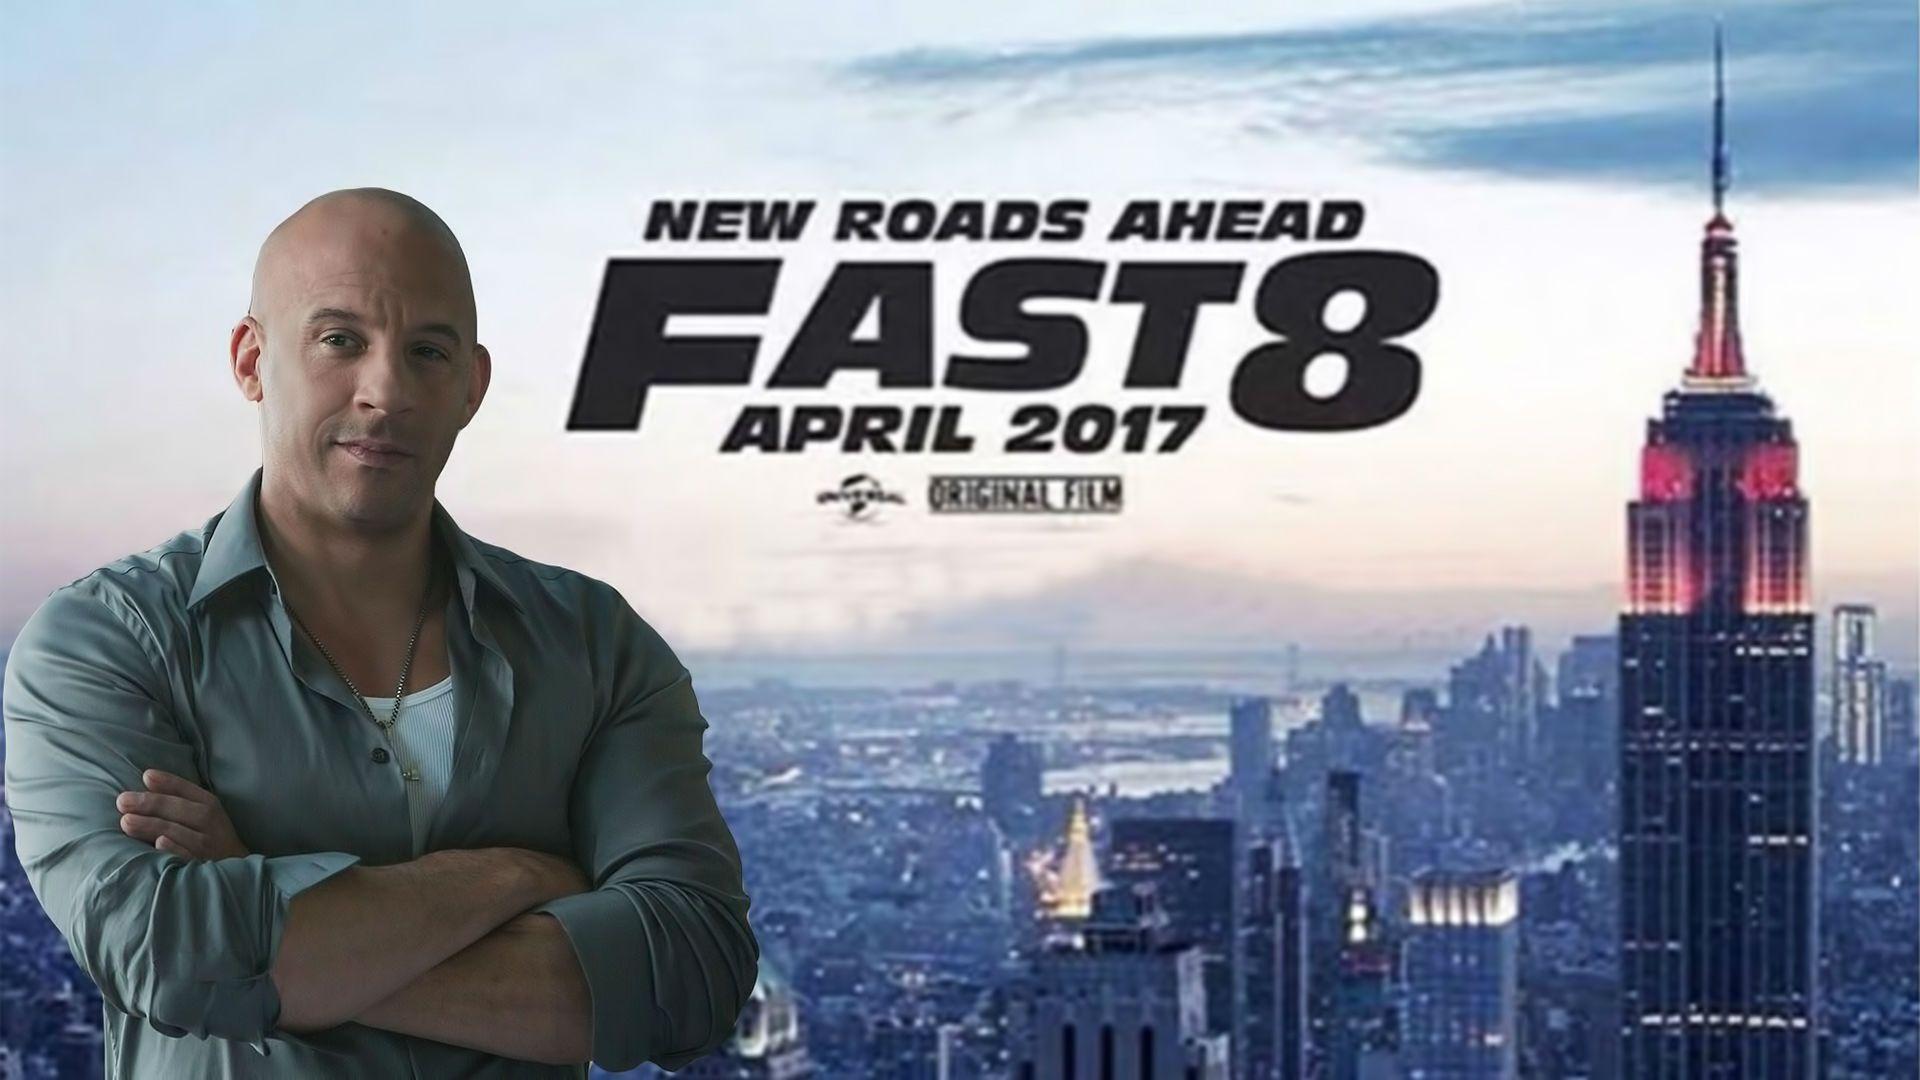 Fast and Furious 8 Wallpaper: Find best latest Fast and Furious 8